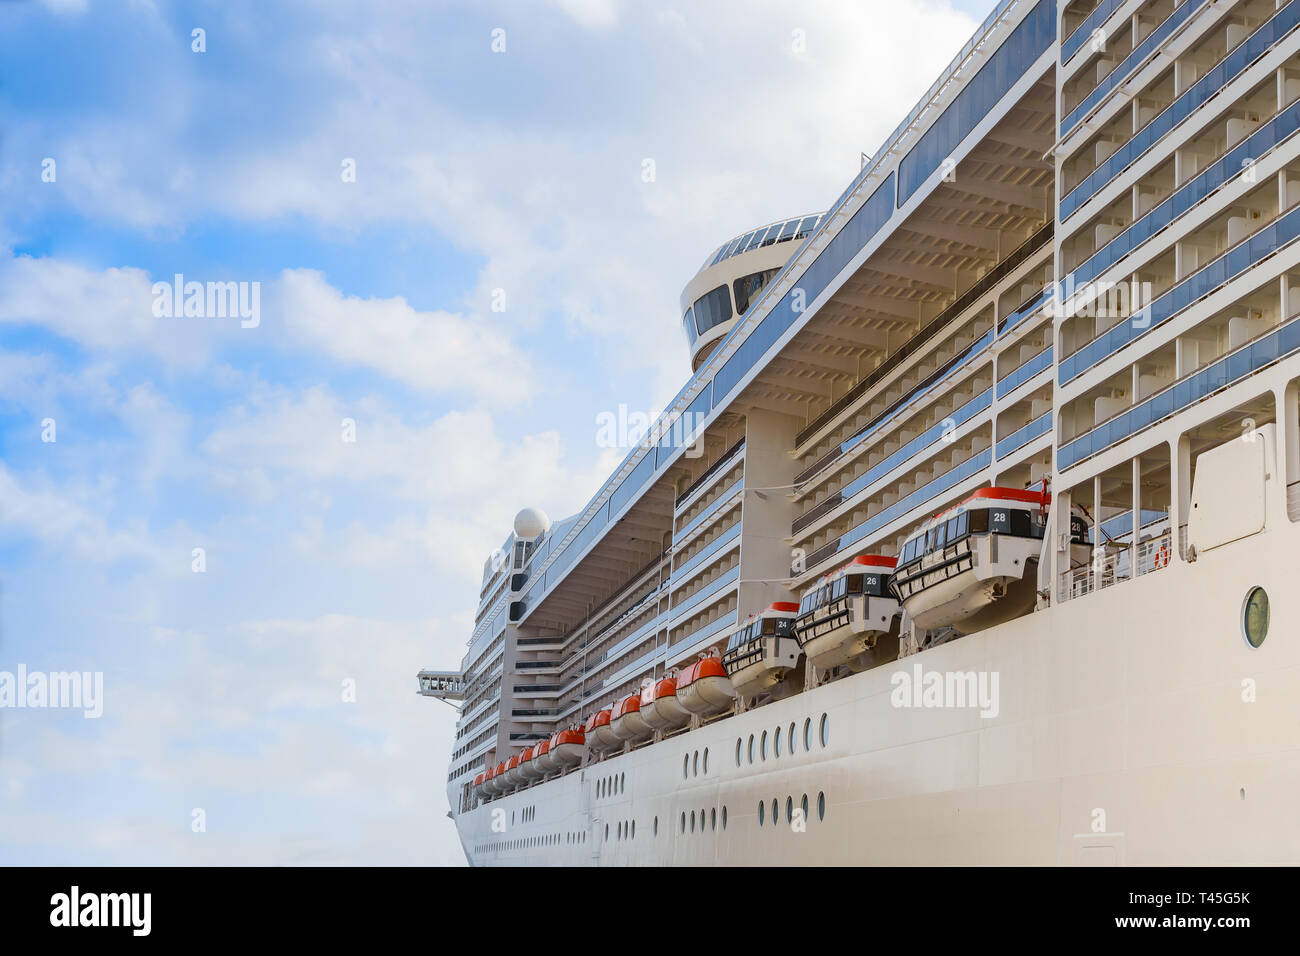 Luxury cruise liner passenger ship with lifeboats for emergency evacuation on the board side view Stock Photo